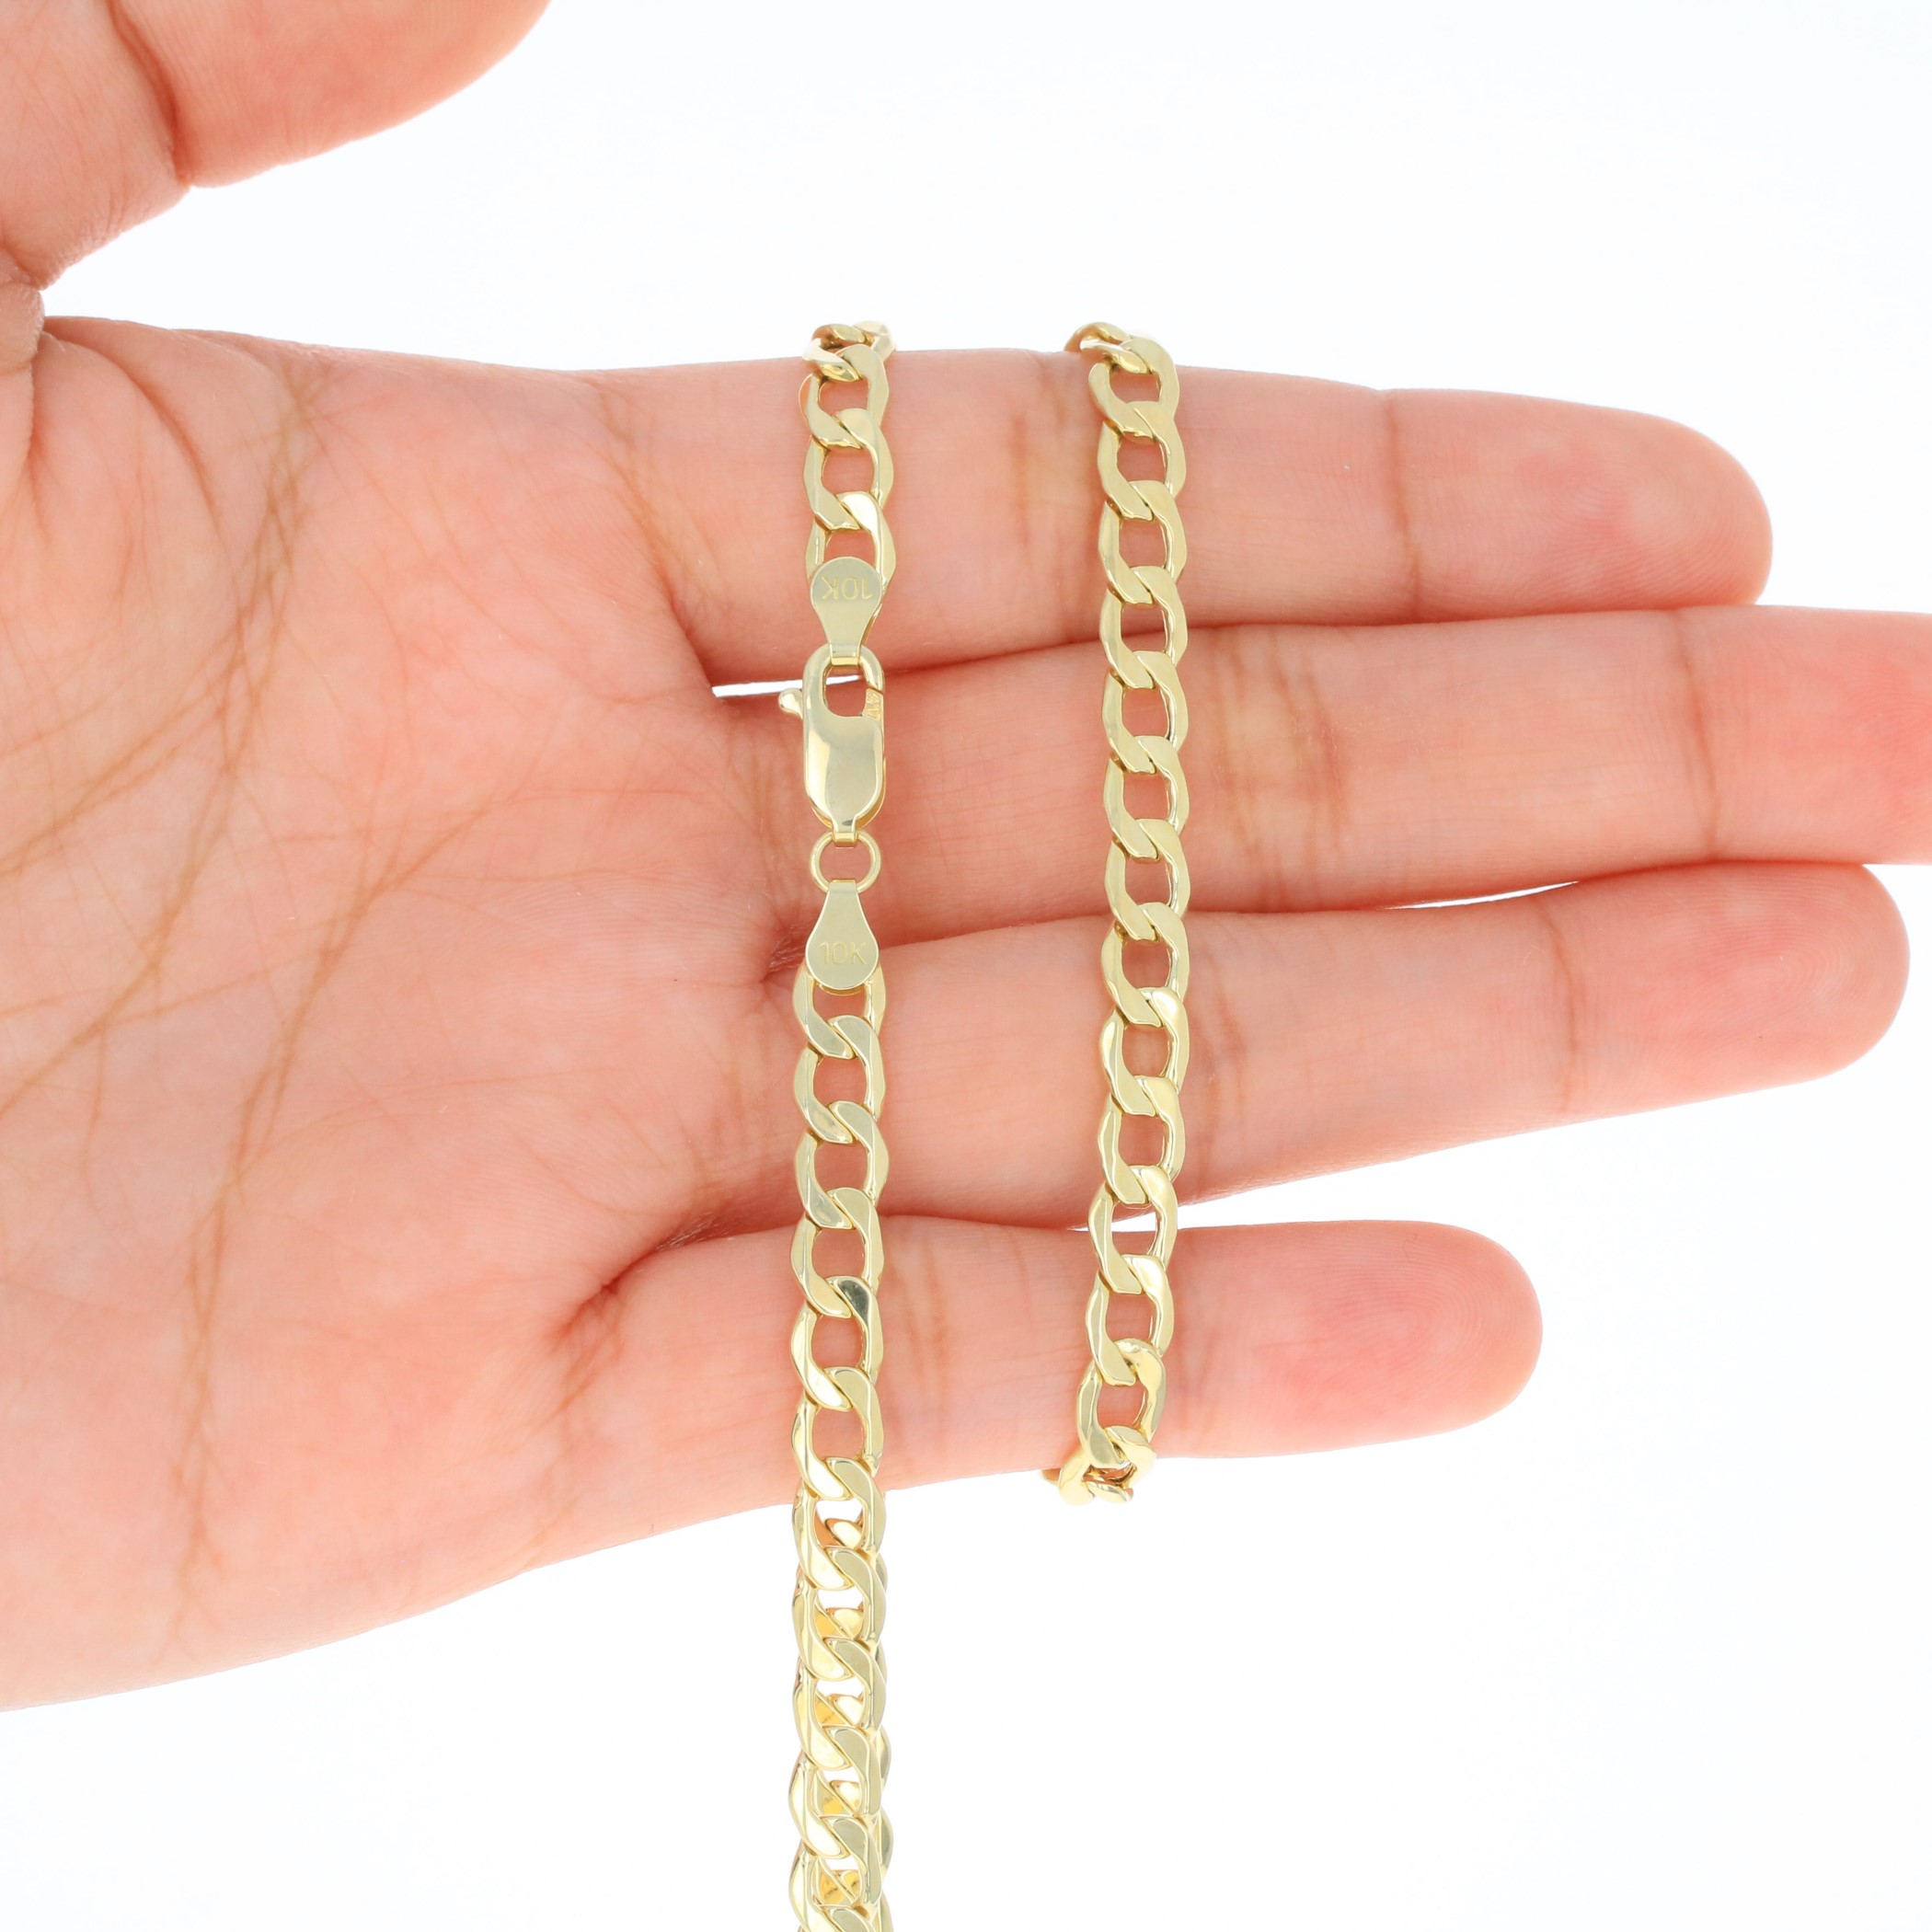 Nuragold 10k Yellow Gold 5.5mm Cuban Curb Link Chain Pendant Necklace, Mens Womens Jewelry 16" - 30" - image 4 of 11